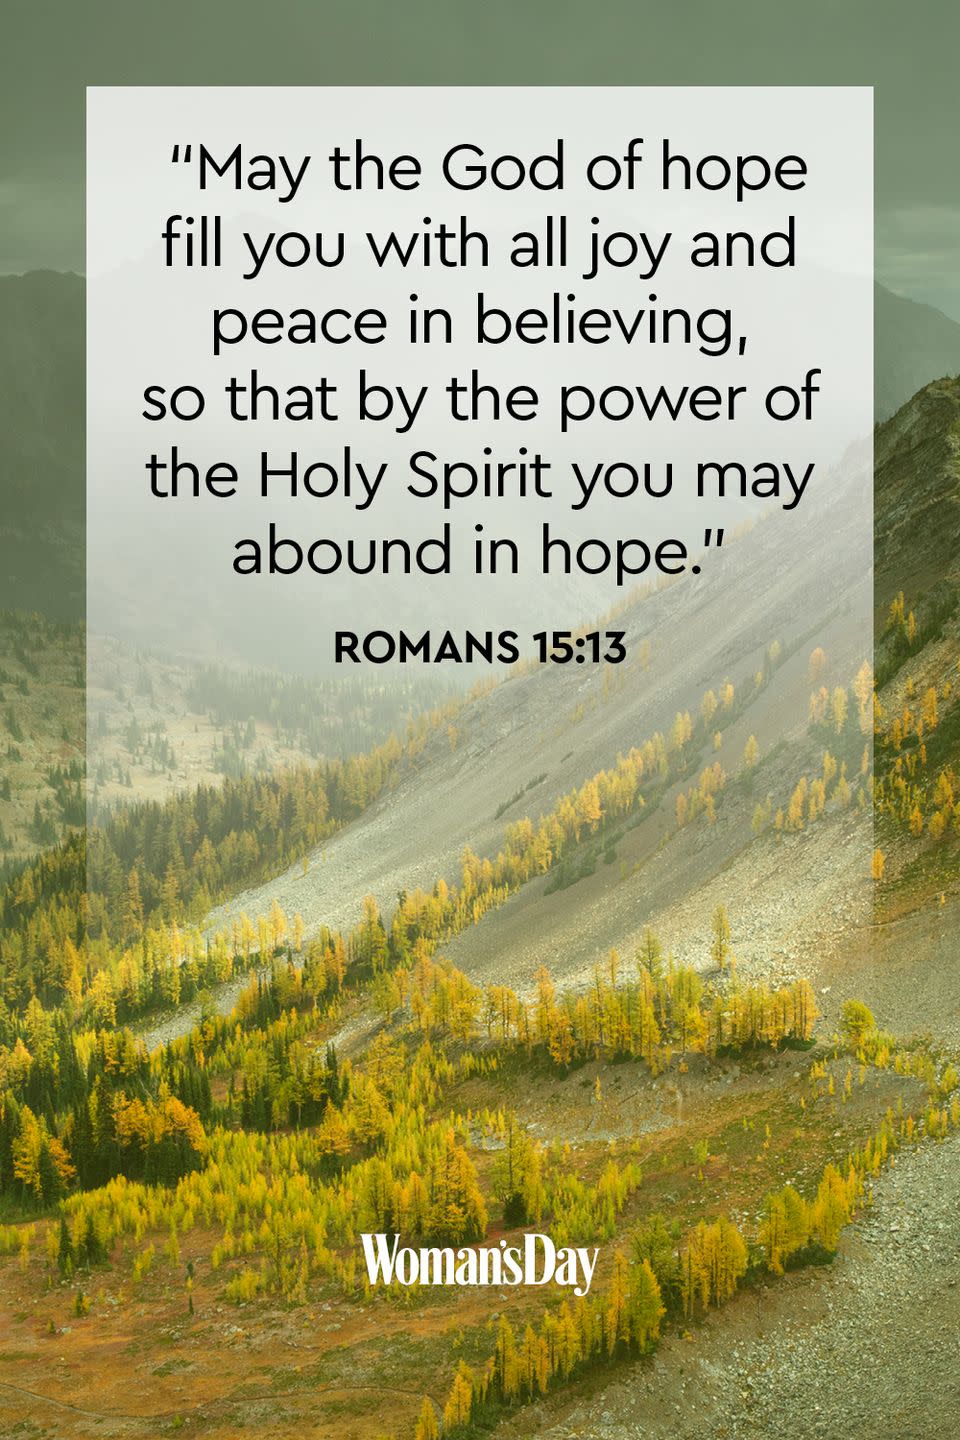 <p> “May the God of hope fill you with all joy and peace in believing, so that by the power of the Holy Spirit you may abound in hope.”</p><p><strong>The Good News: </strong>Hope and joy go hand in hand. </p>